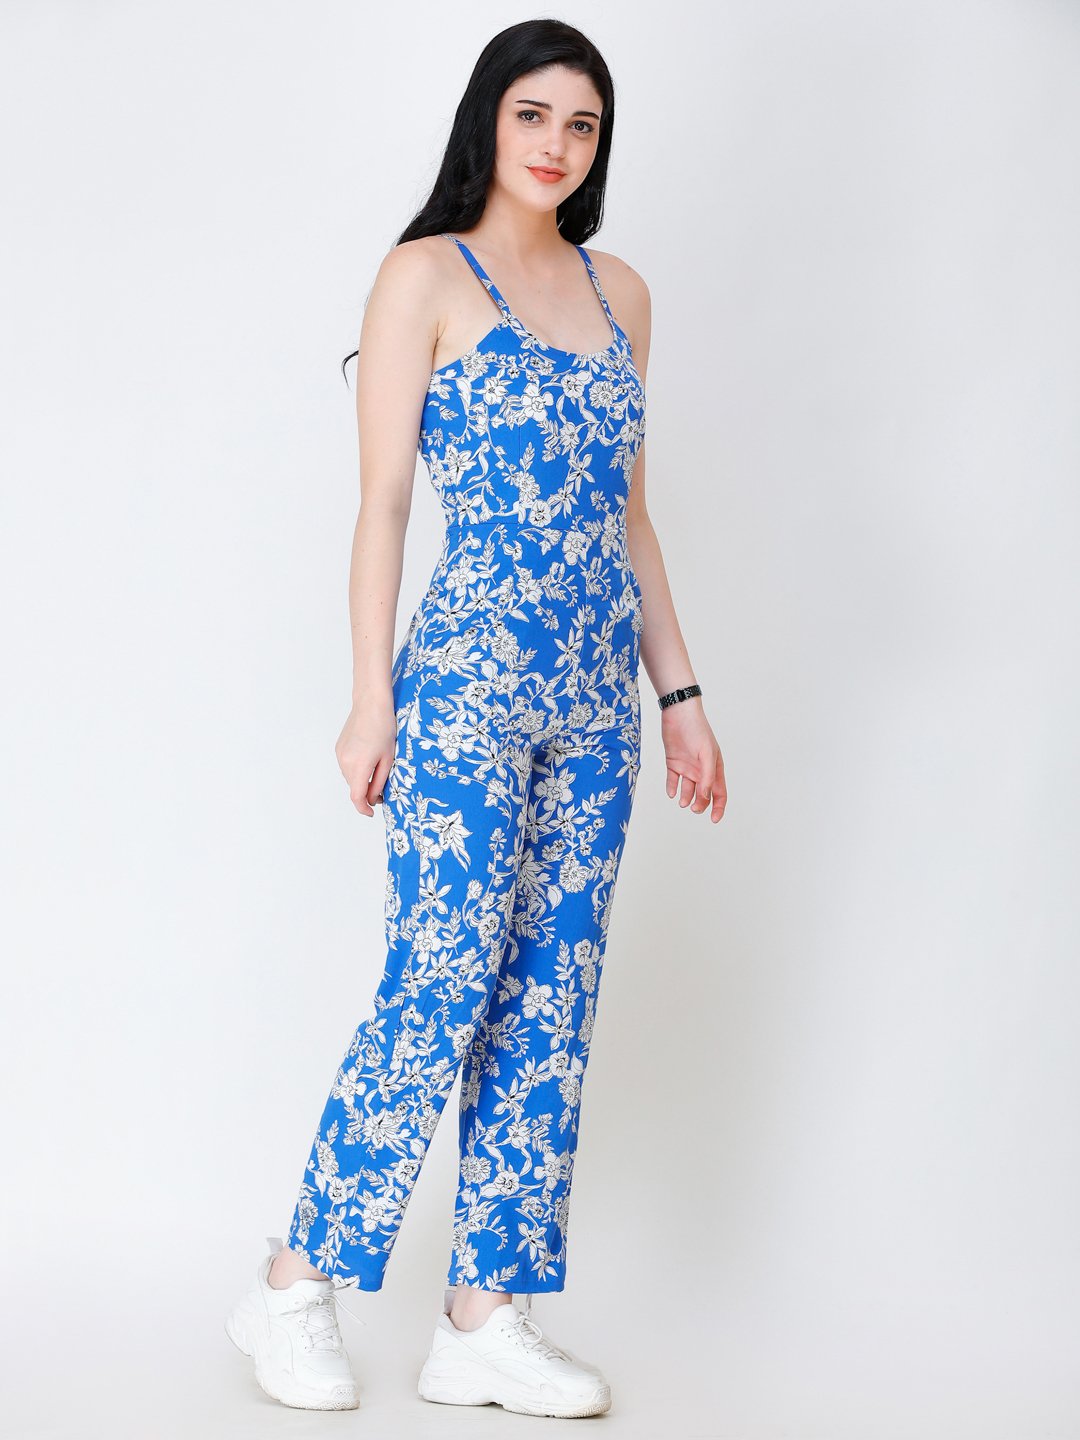 SCORPIUS BLUE AND WHITE PRINTED JUMPSUIT